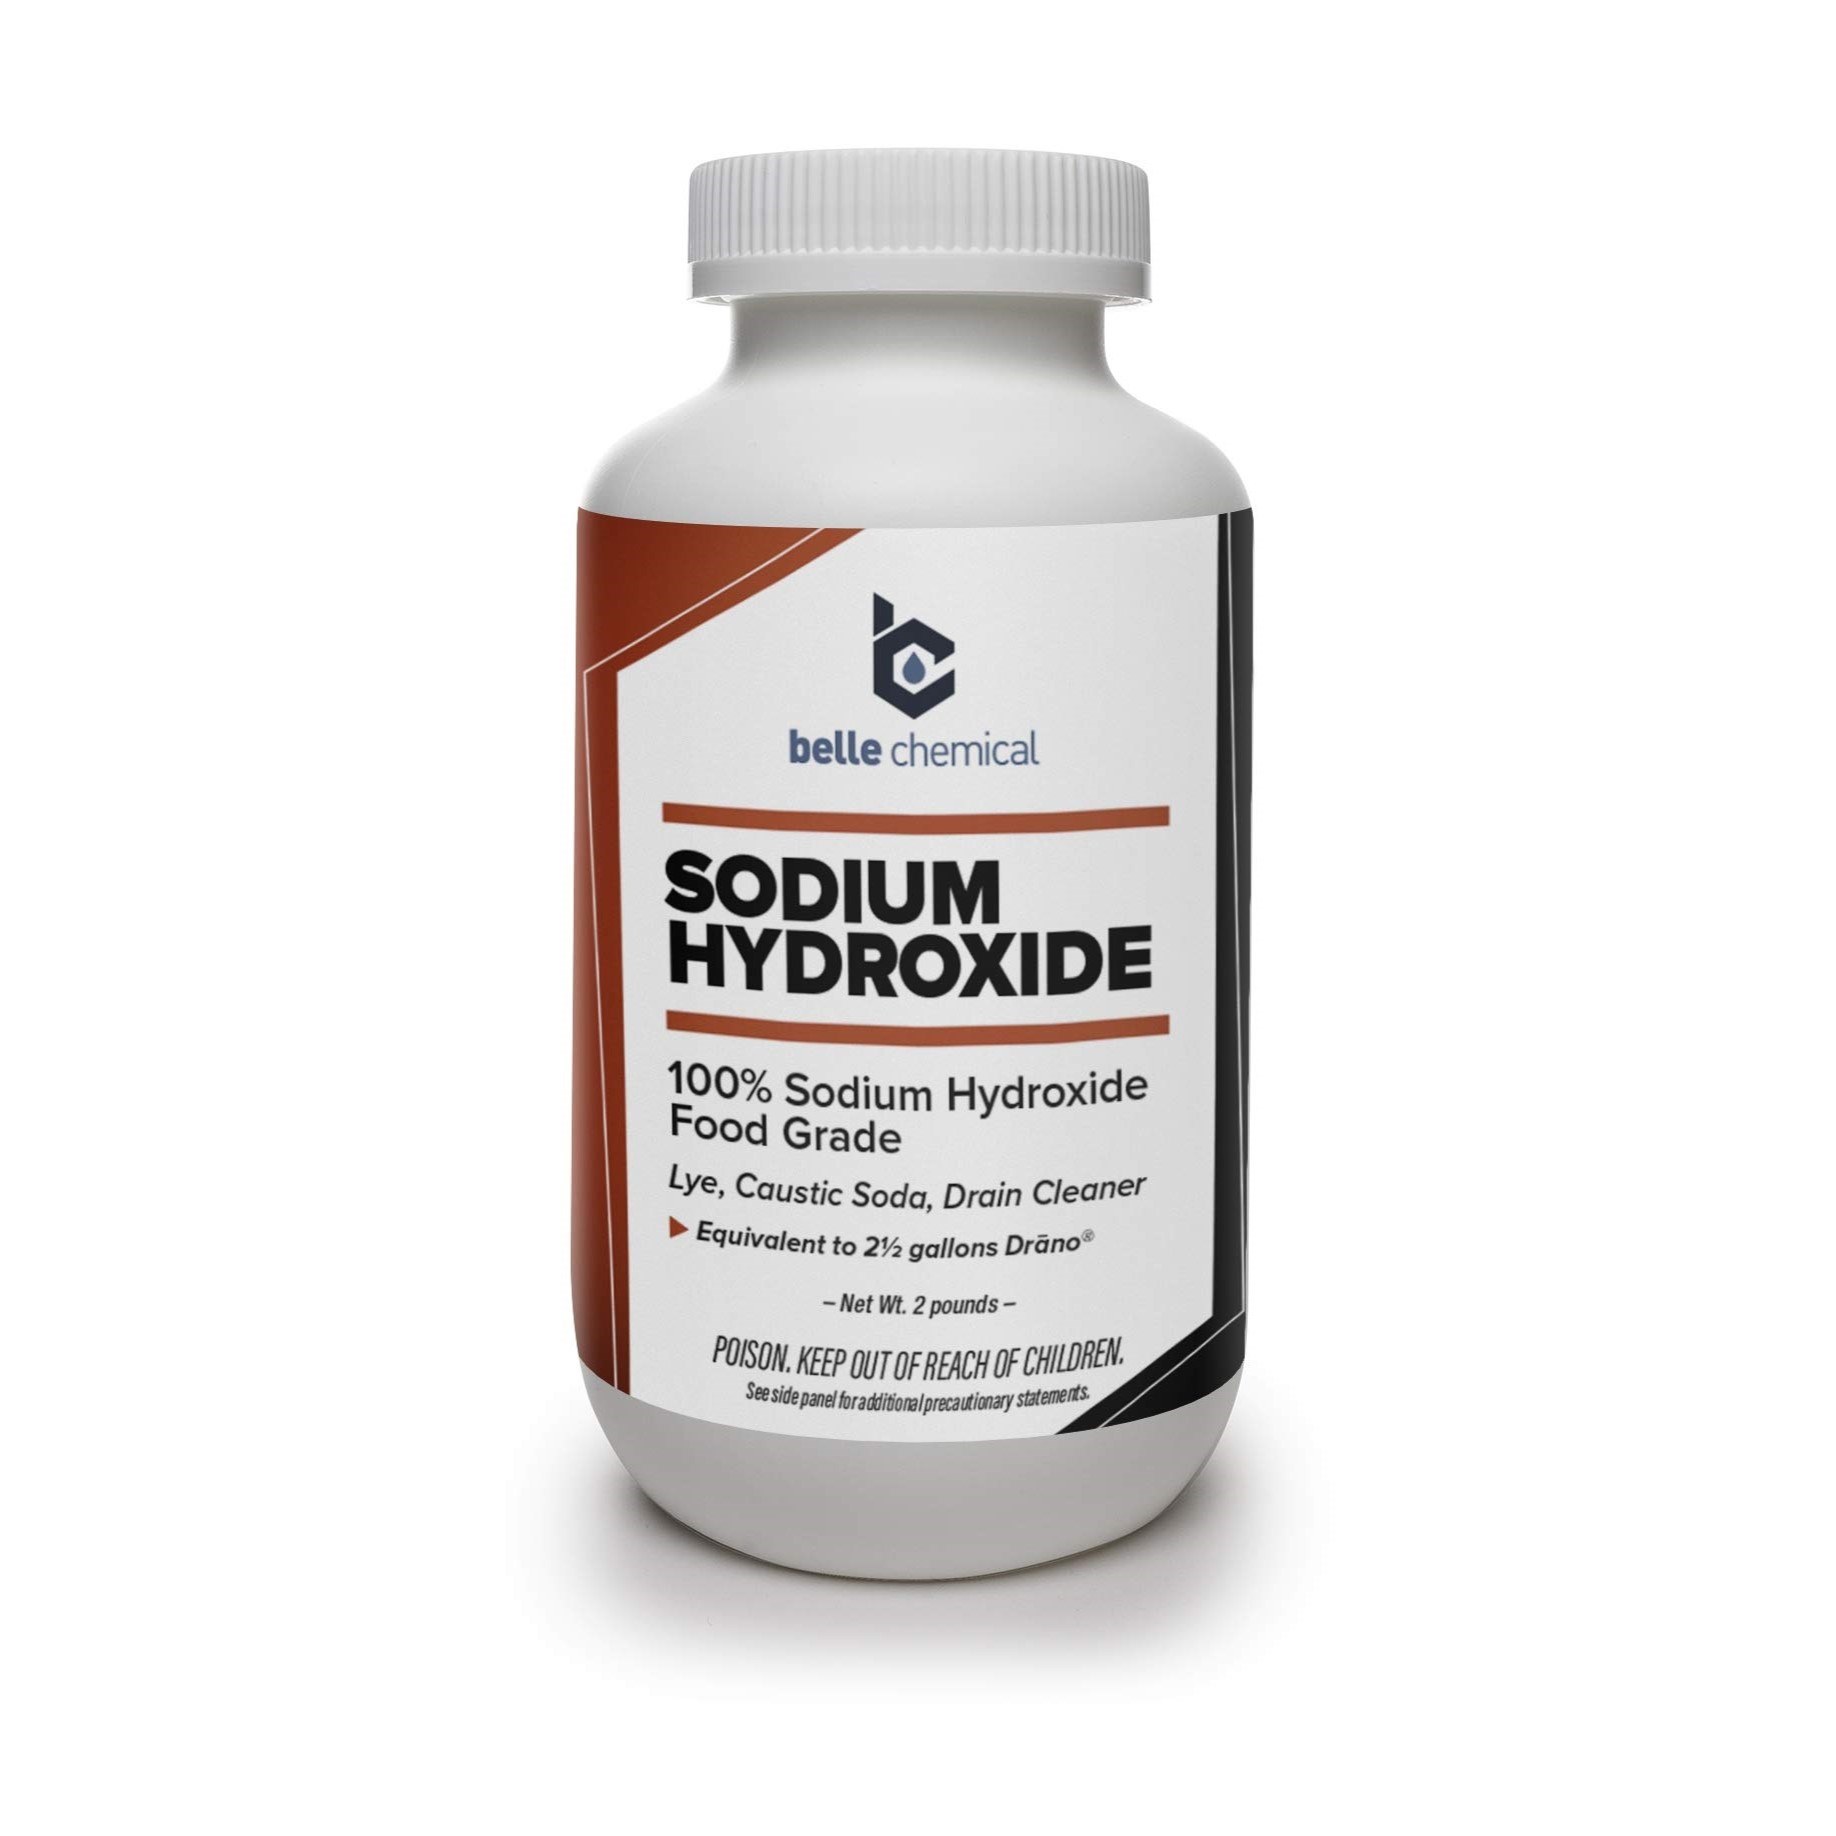 How To Store Sodium Hydroxide